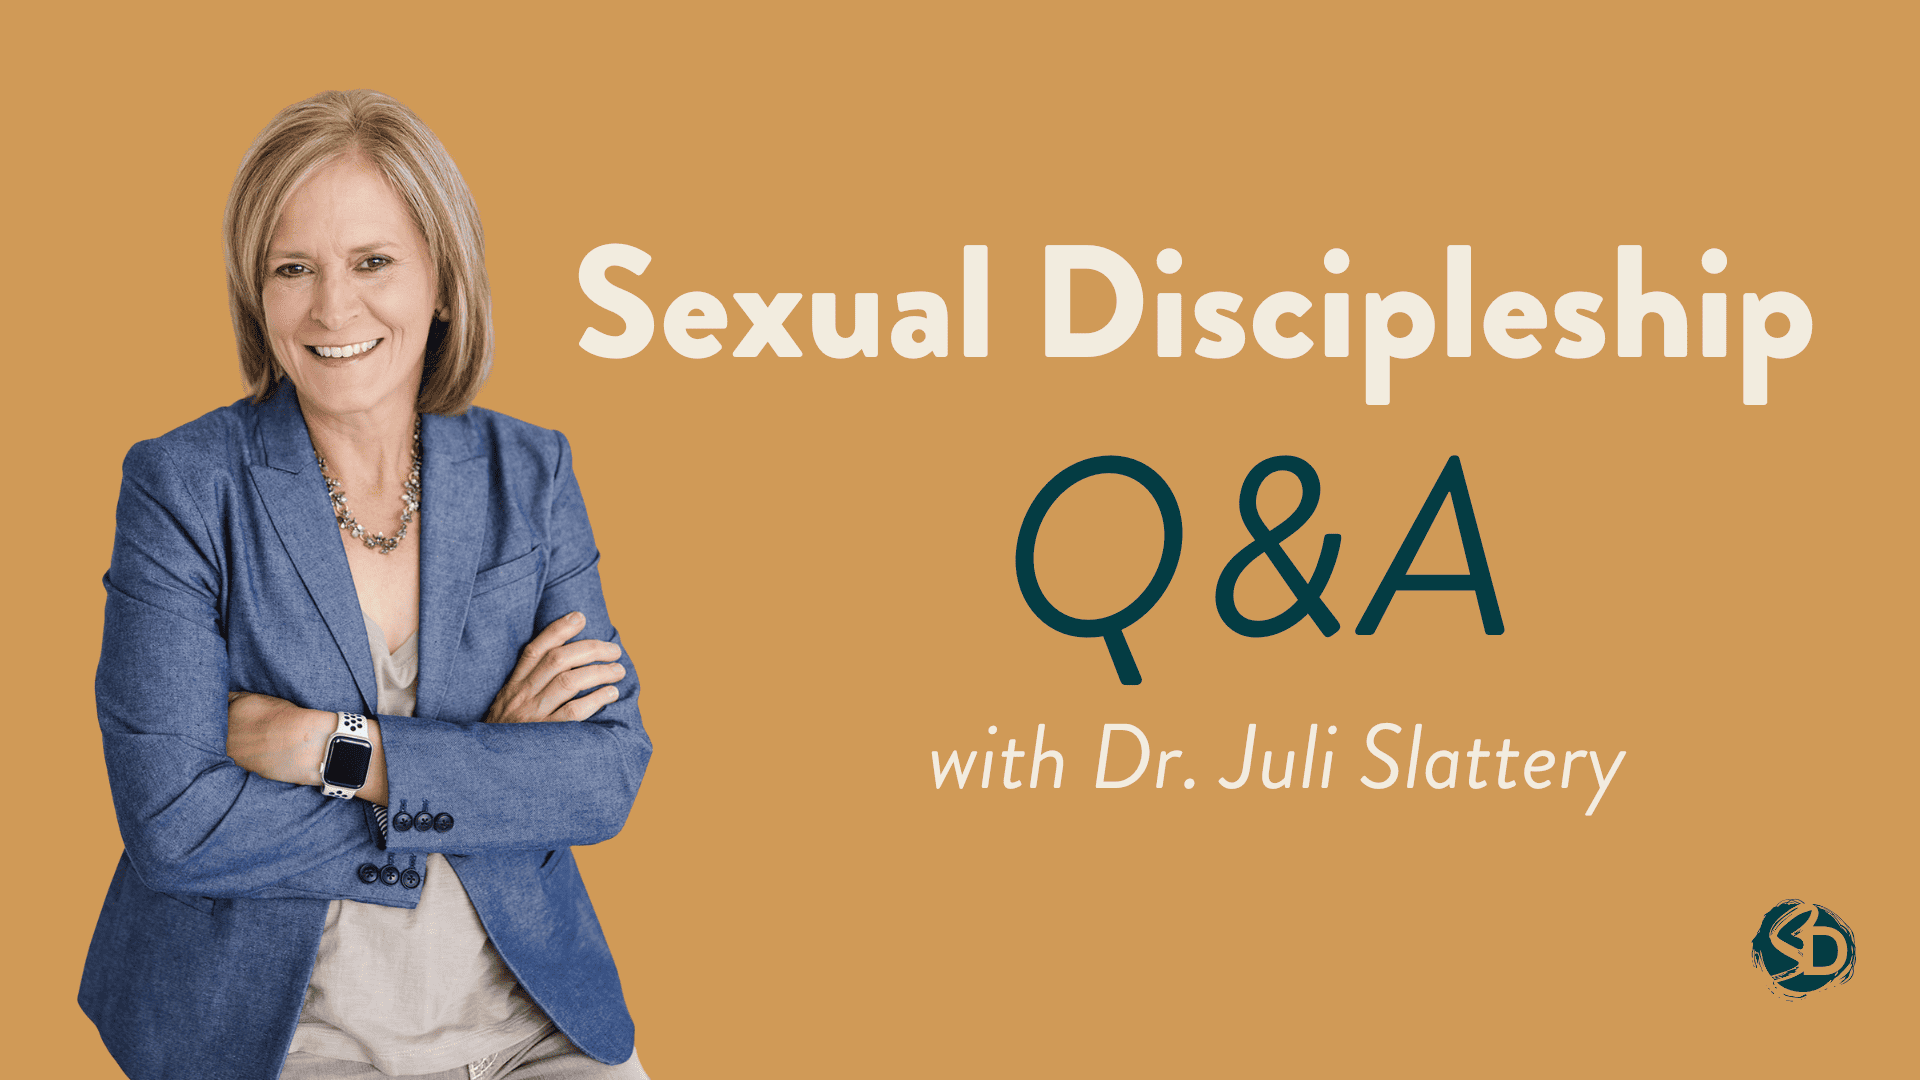 Q&A: What is a Healthy and Biblical Approach to Helping a Ministry Leader Struggling with Sexual Sin?